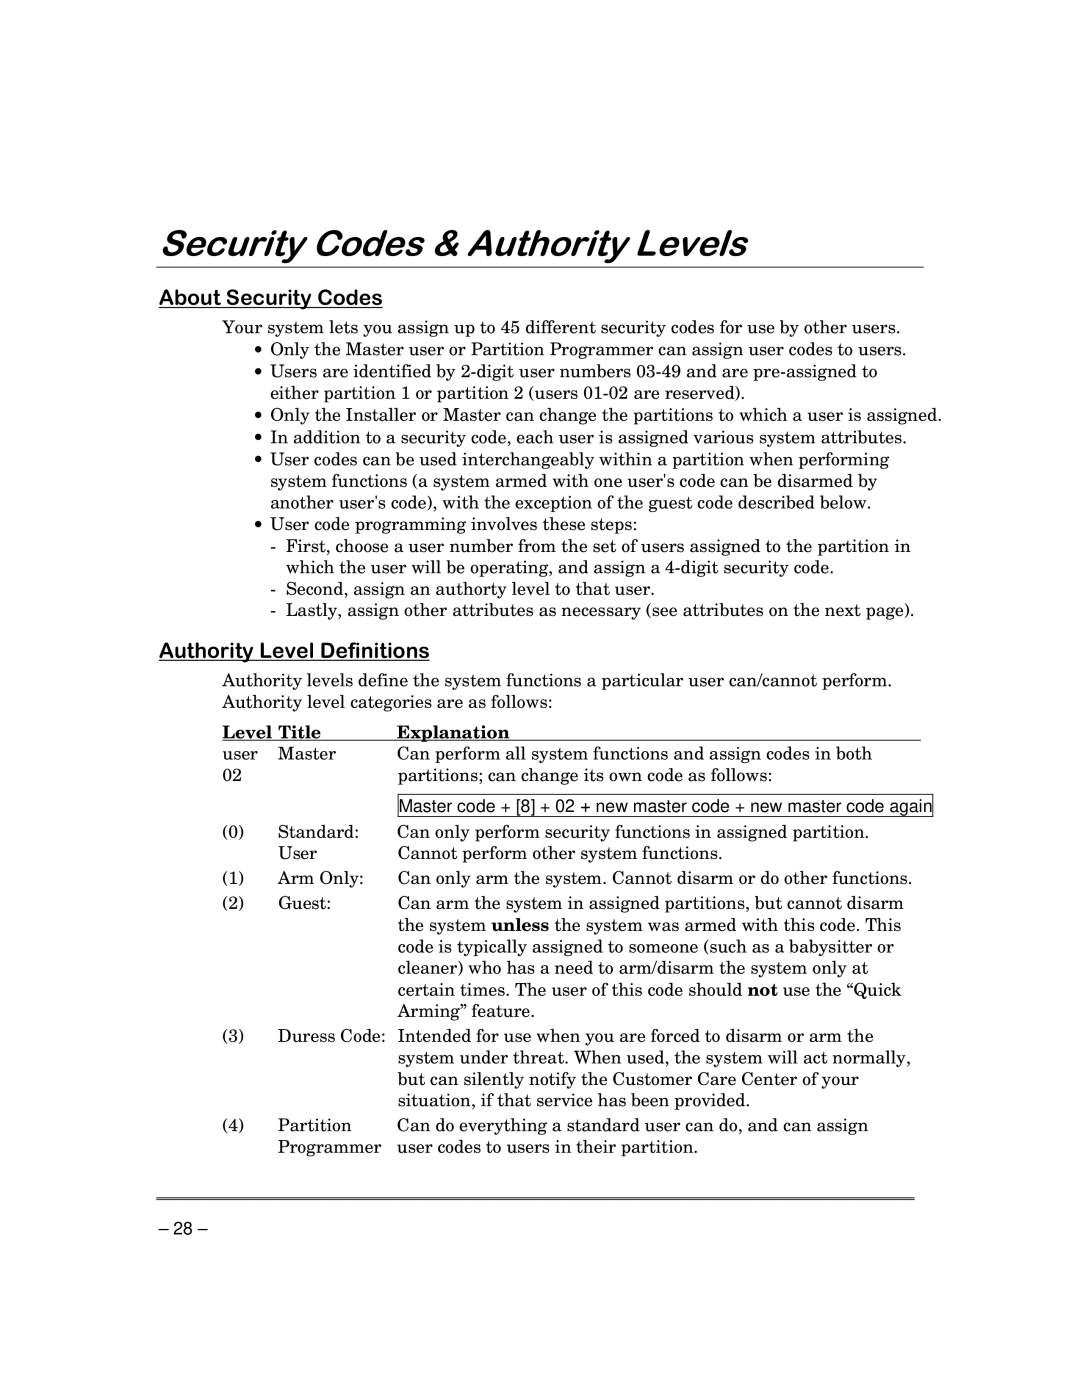 ADT Security Services 3000 manual 6HFXULW\&RGHV $XWKRULW\/HYHOV, $ERXW6HFXULW\&RGHV, $Xwkrulw\/Hyho’Hilqlwlrqv 